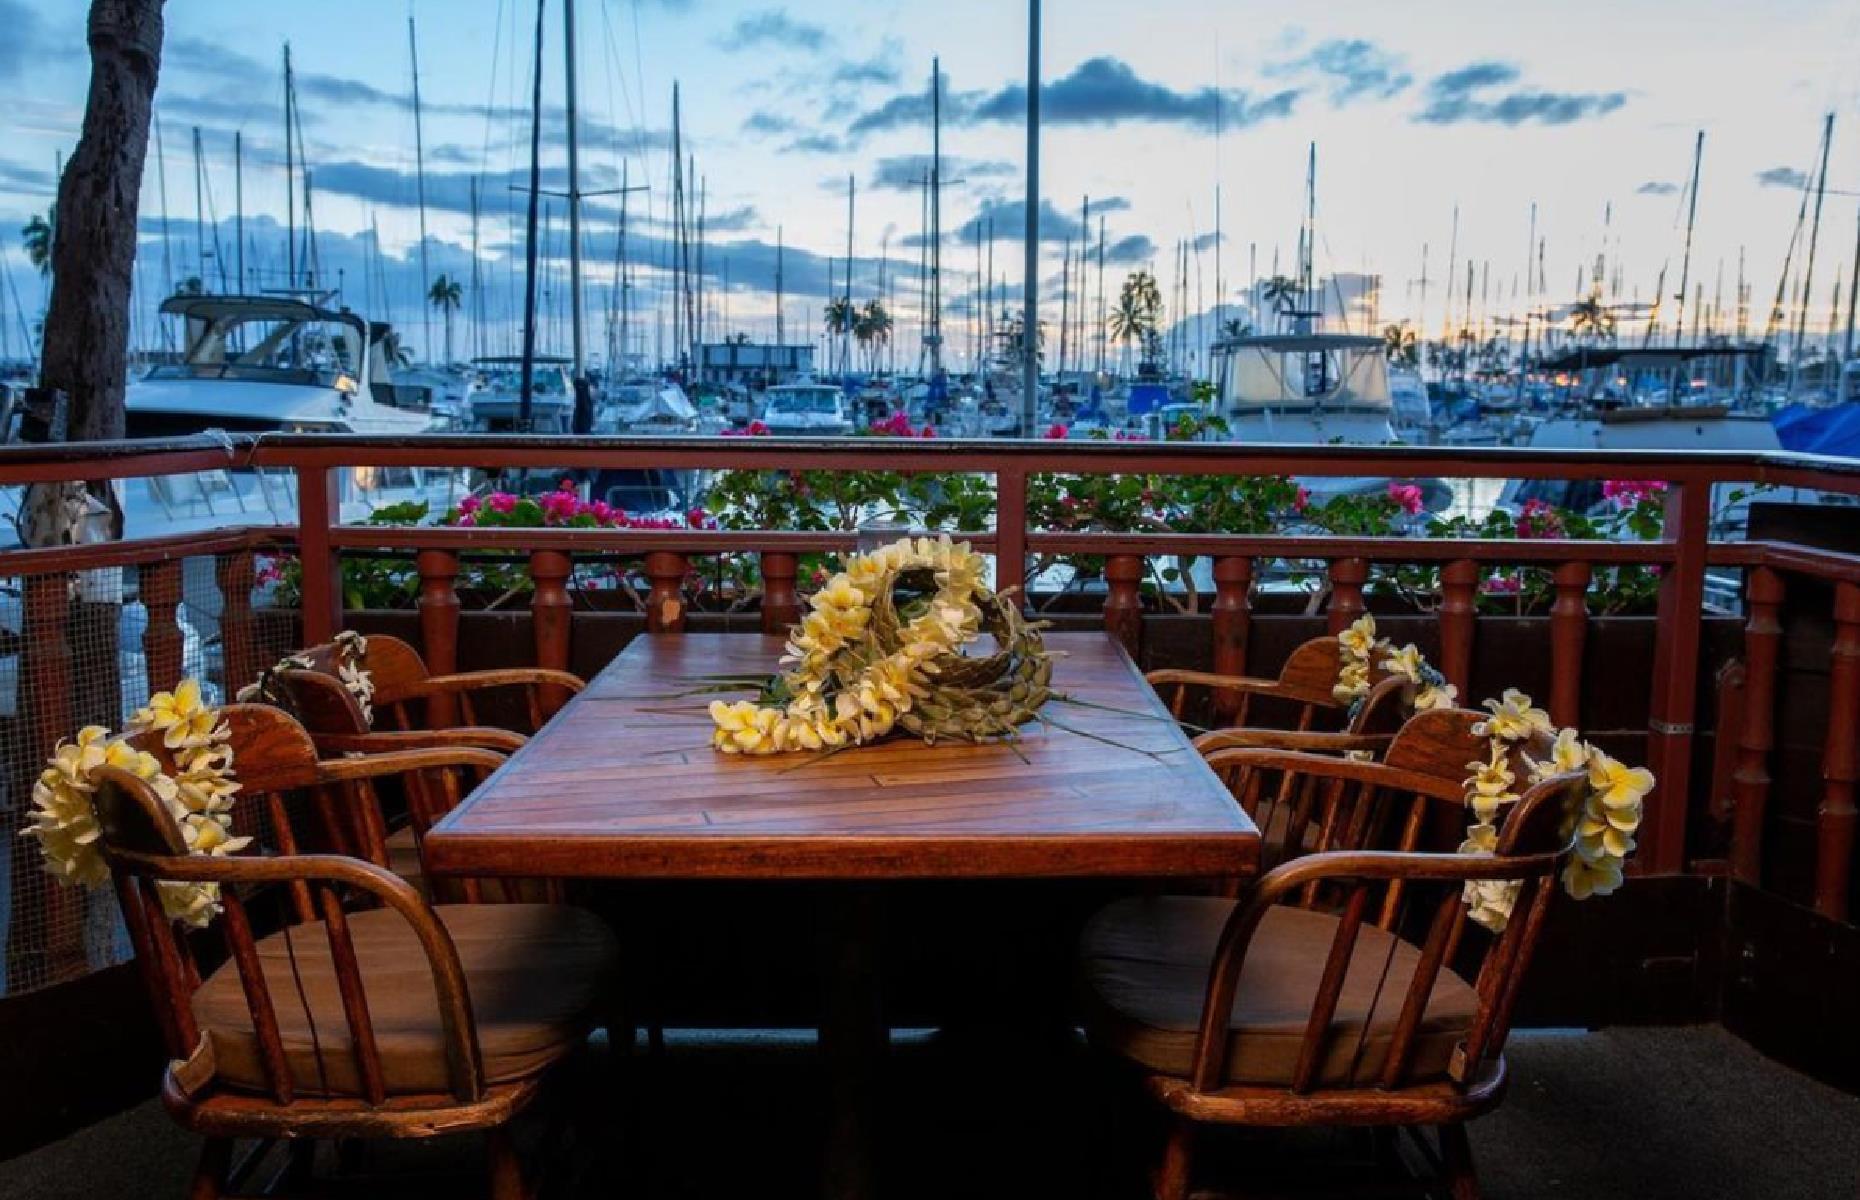 These are the most beautiful restaurants in America